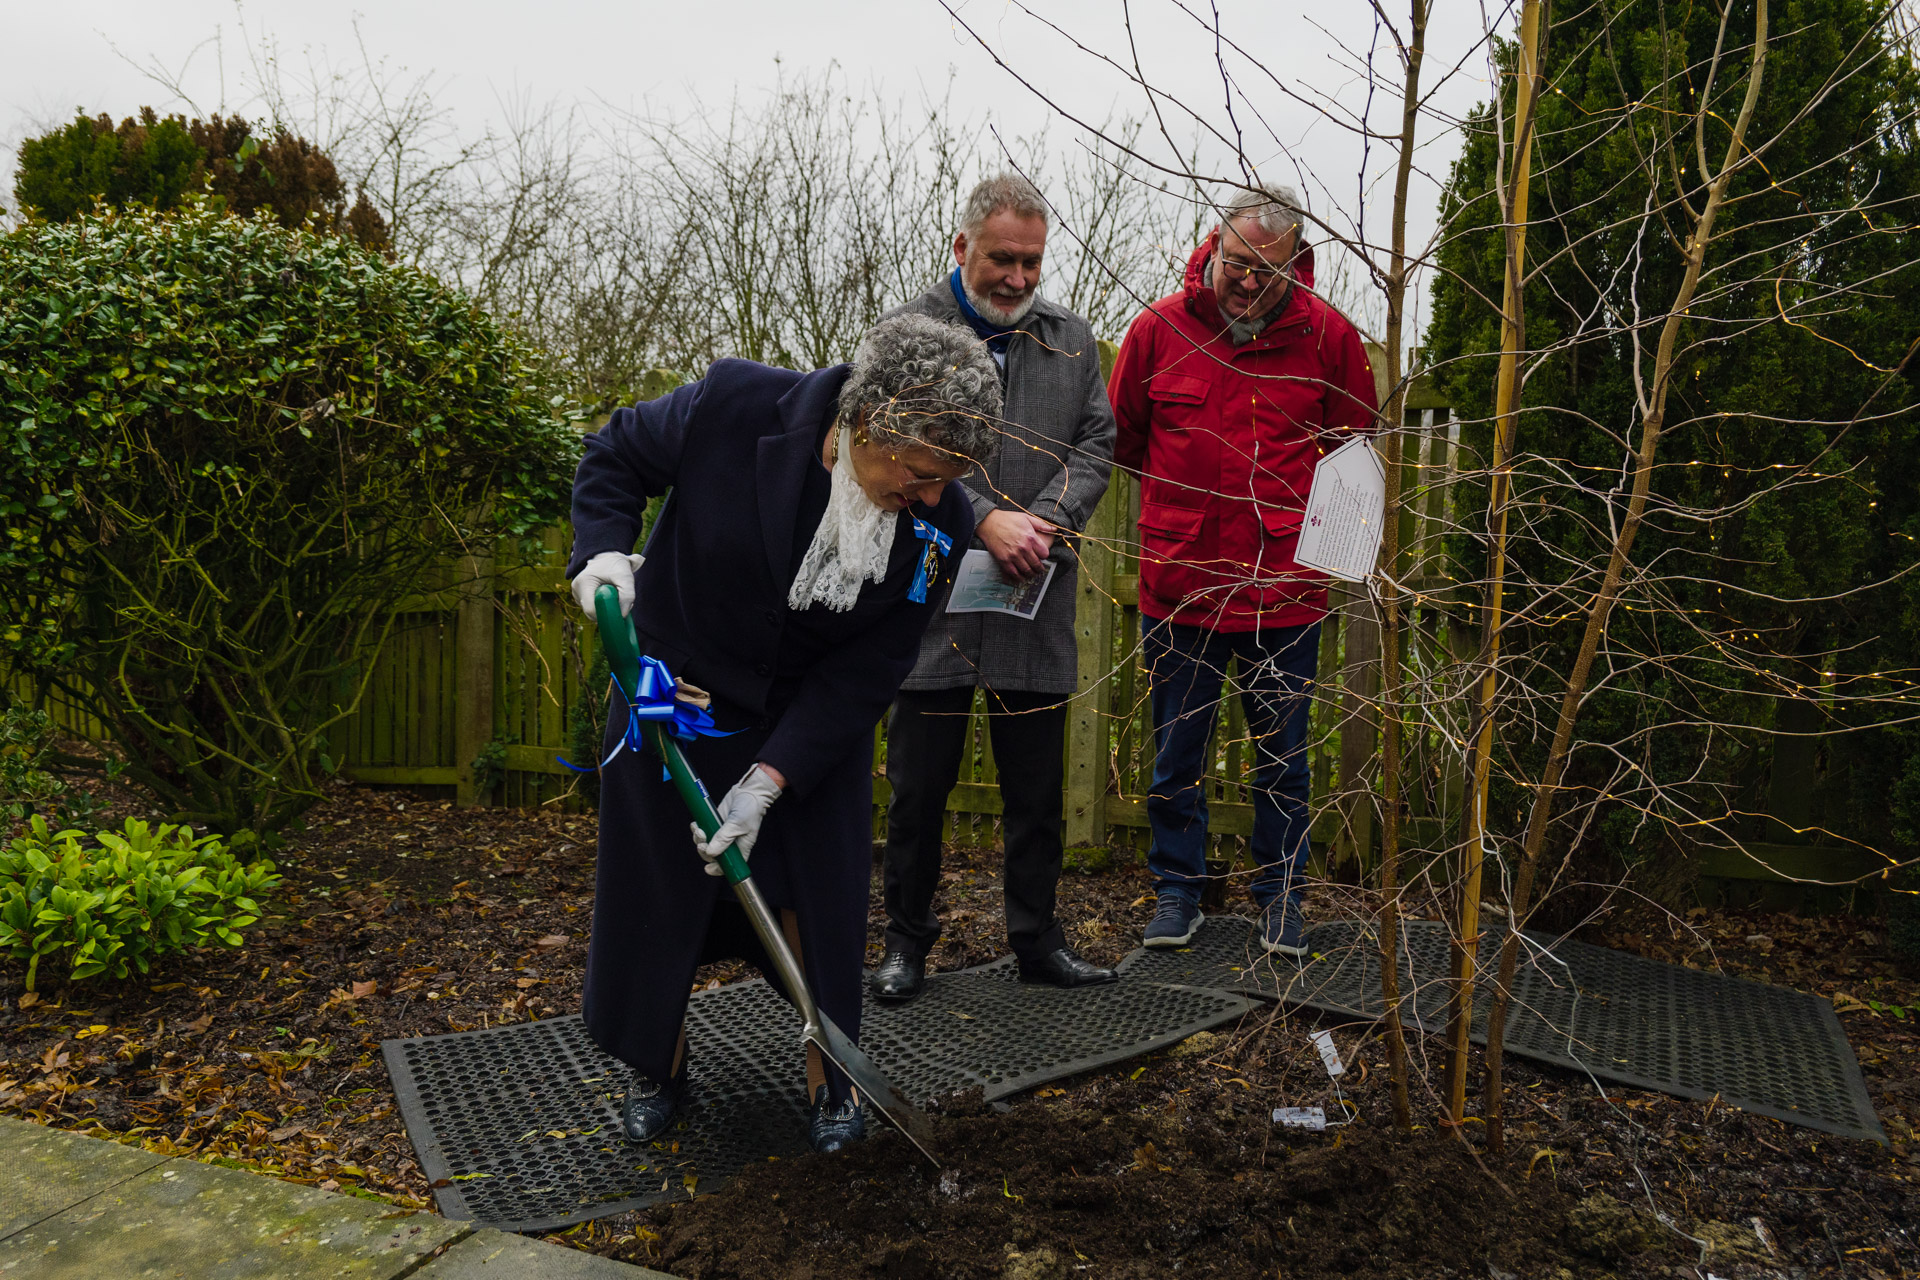 The High Sheriff of West Yorkshire planting Silver Birch